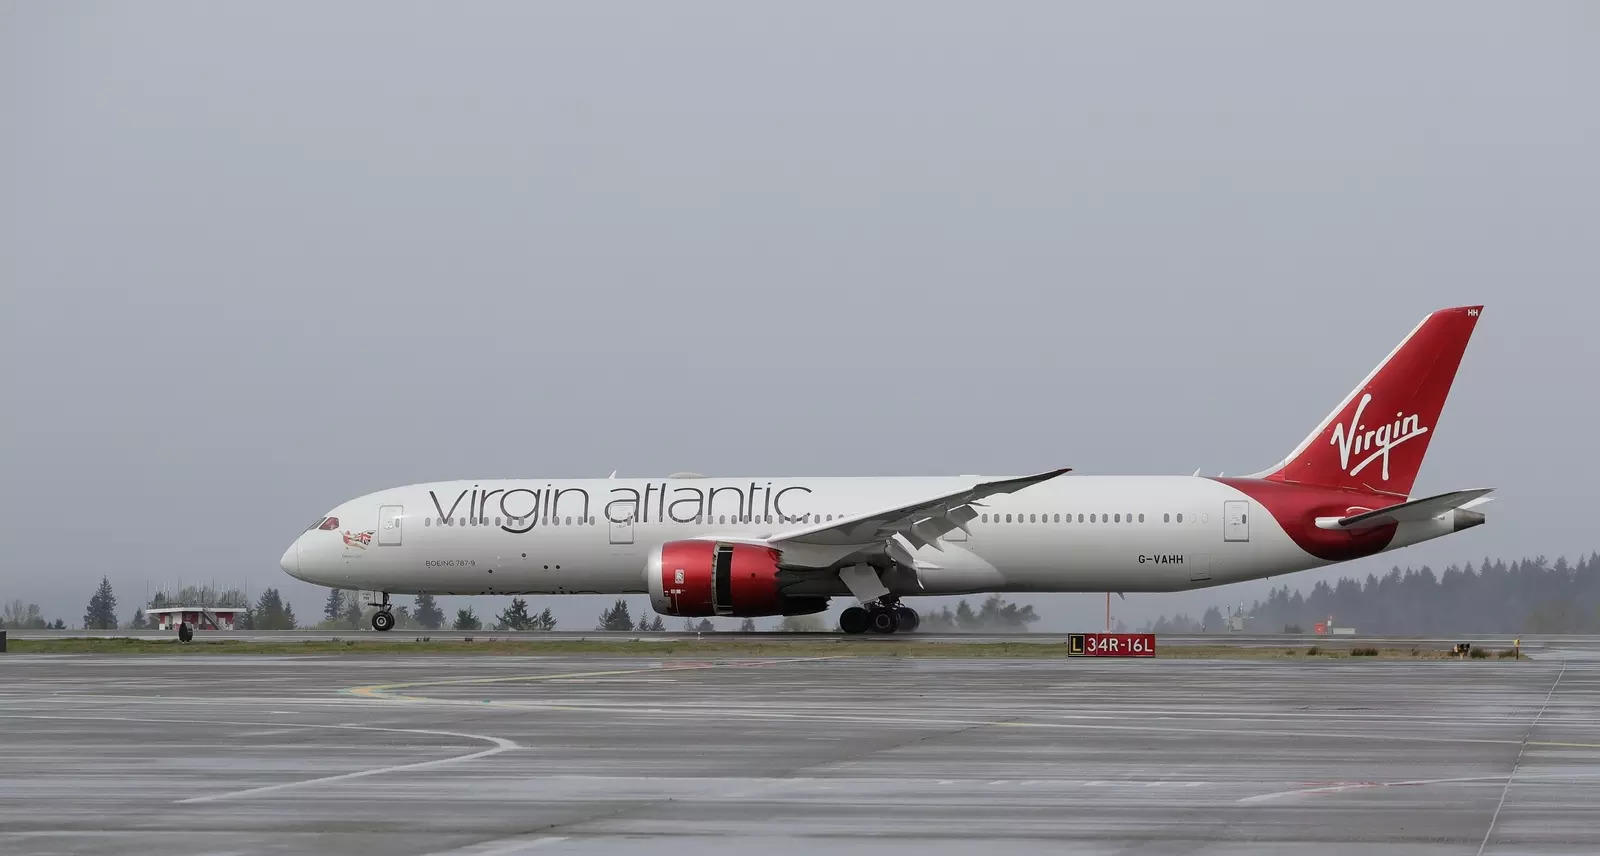 Already at pre-Covid level in India, US transits should accelerate growth: Virgin Atlantic